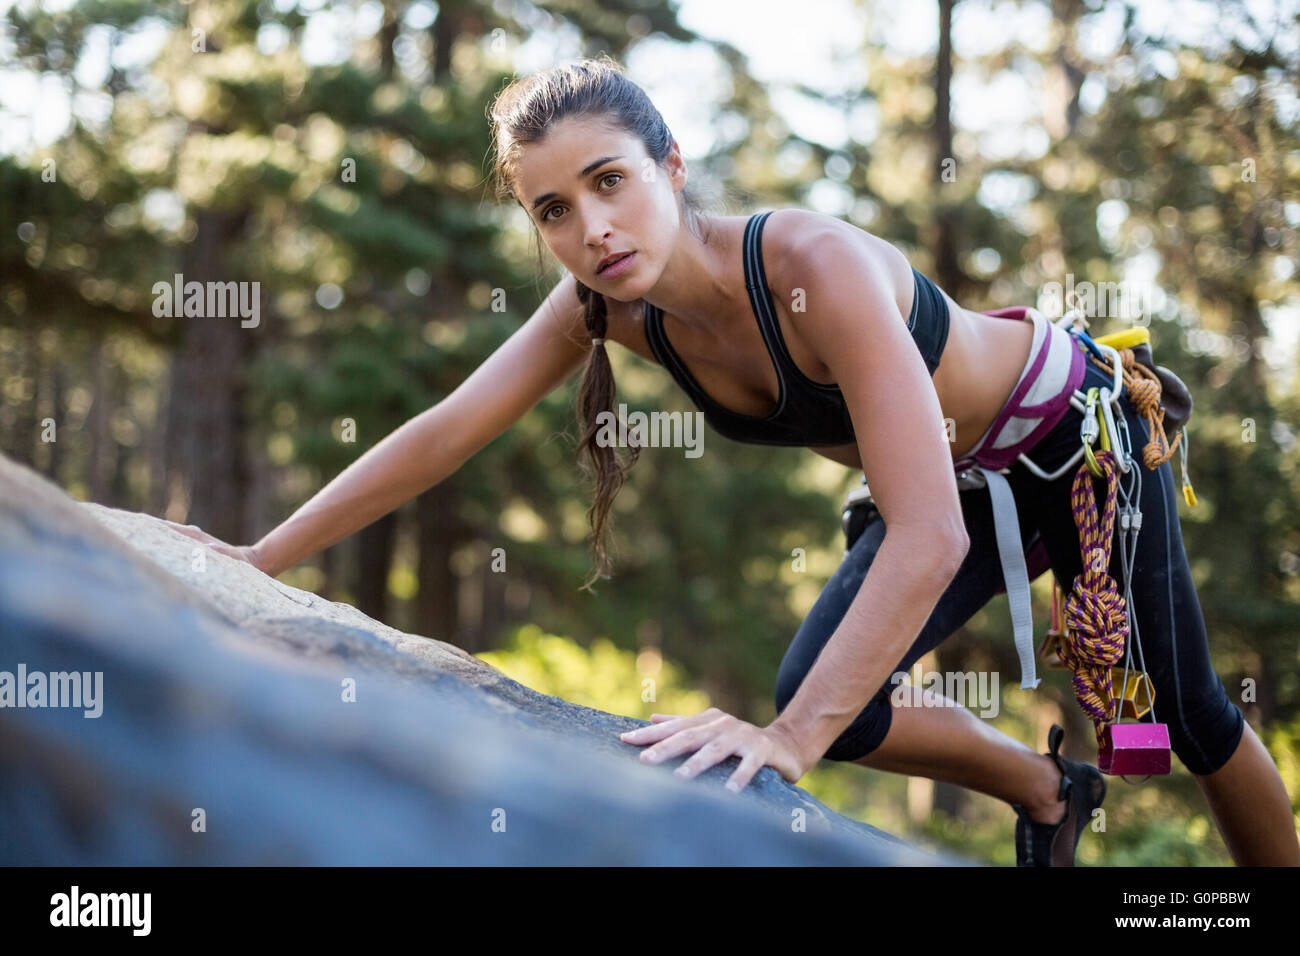 Woman rock climbing and looking the camera Stock Photo